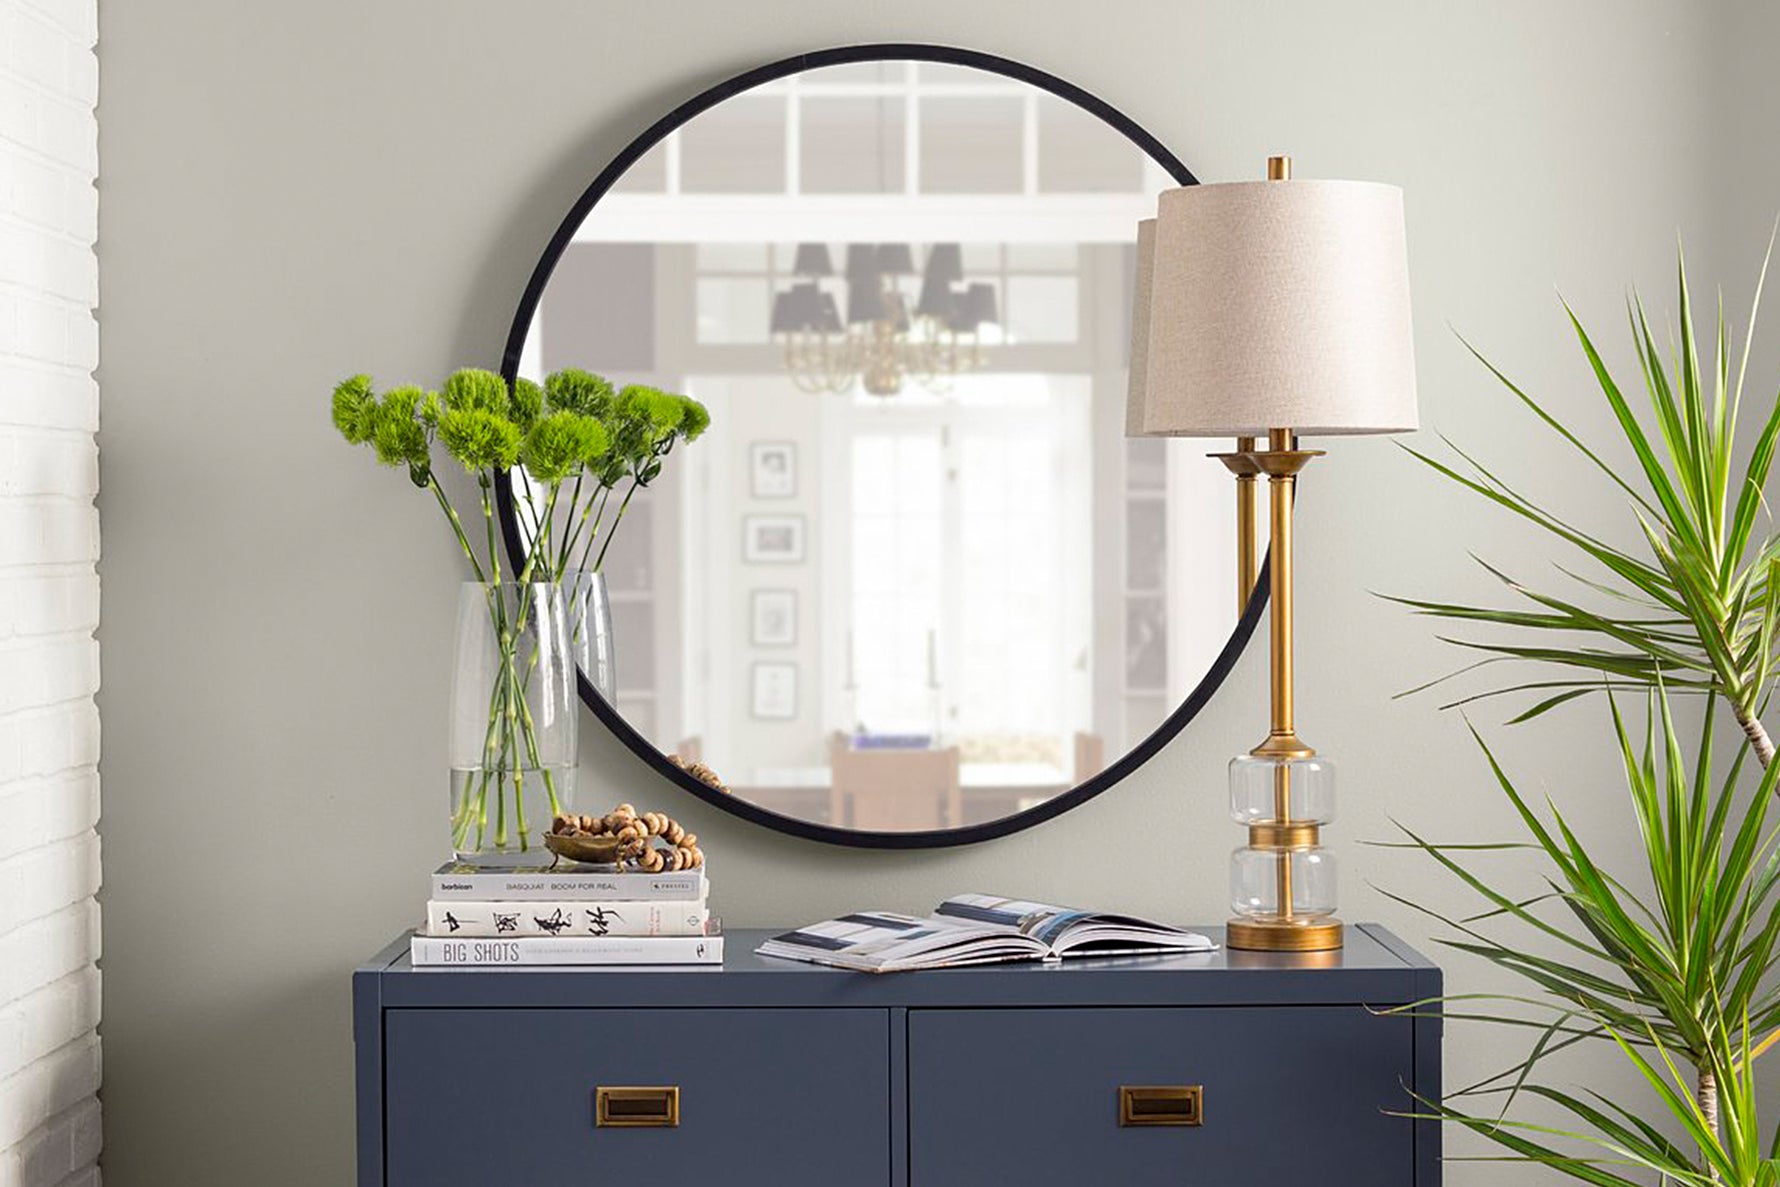 Buyer's Guide: How to Choose the Perfect Mirror for Any Space